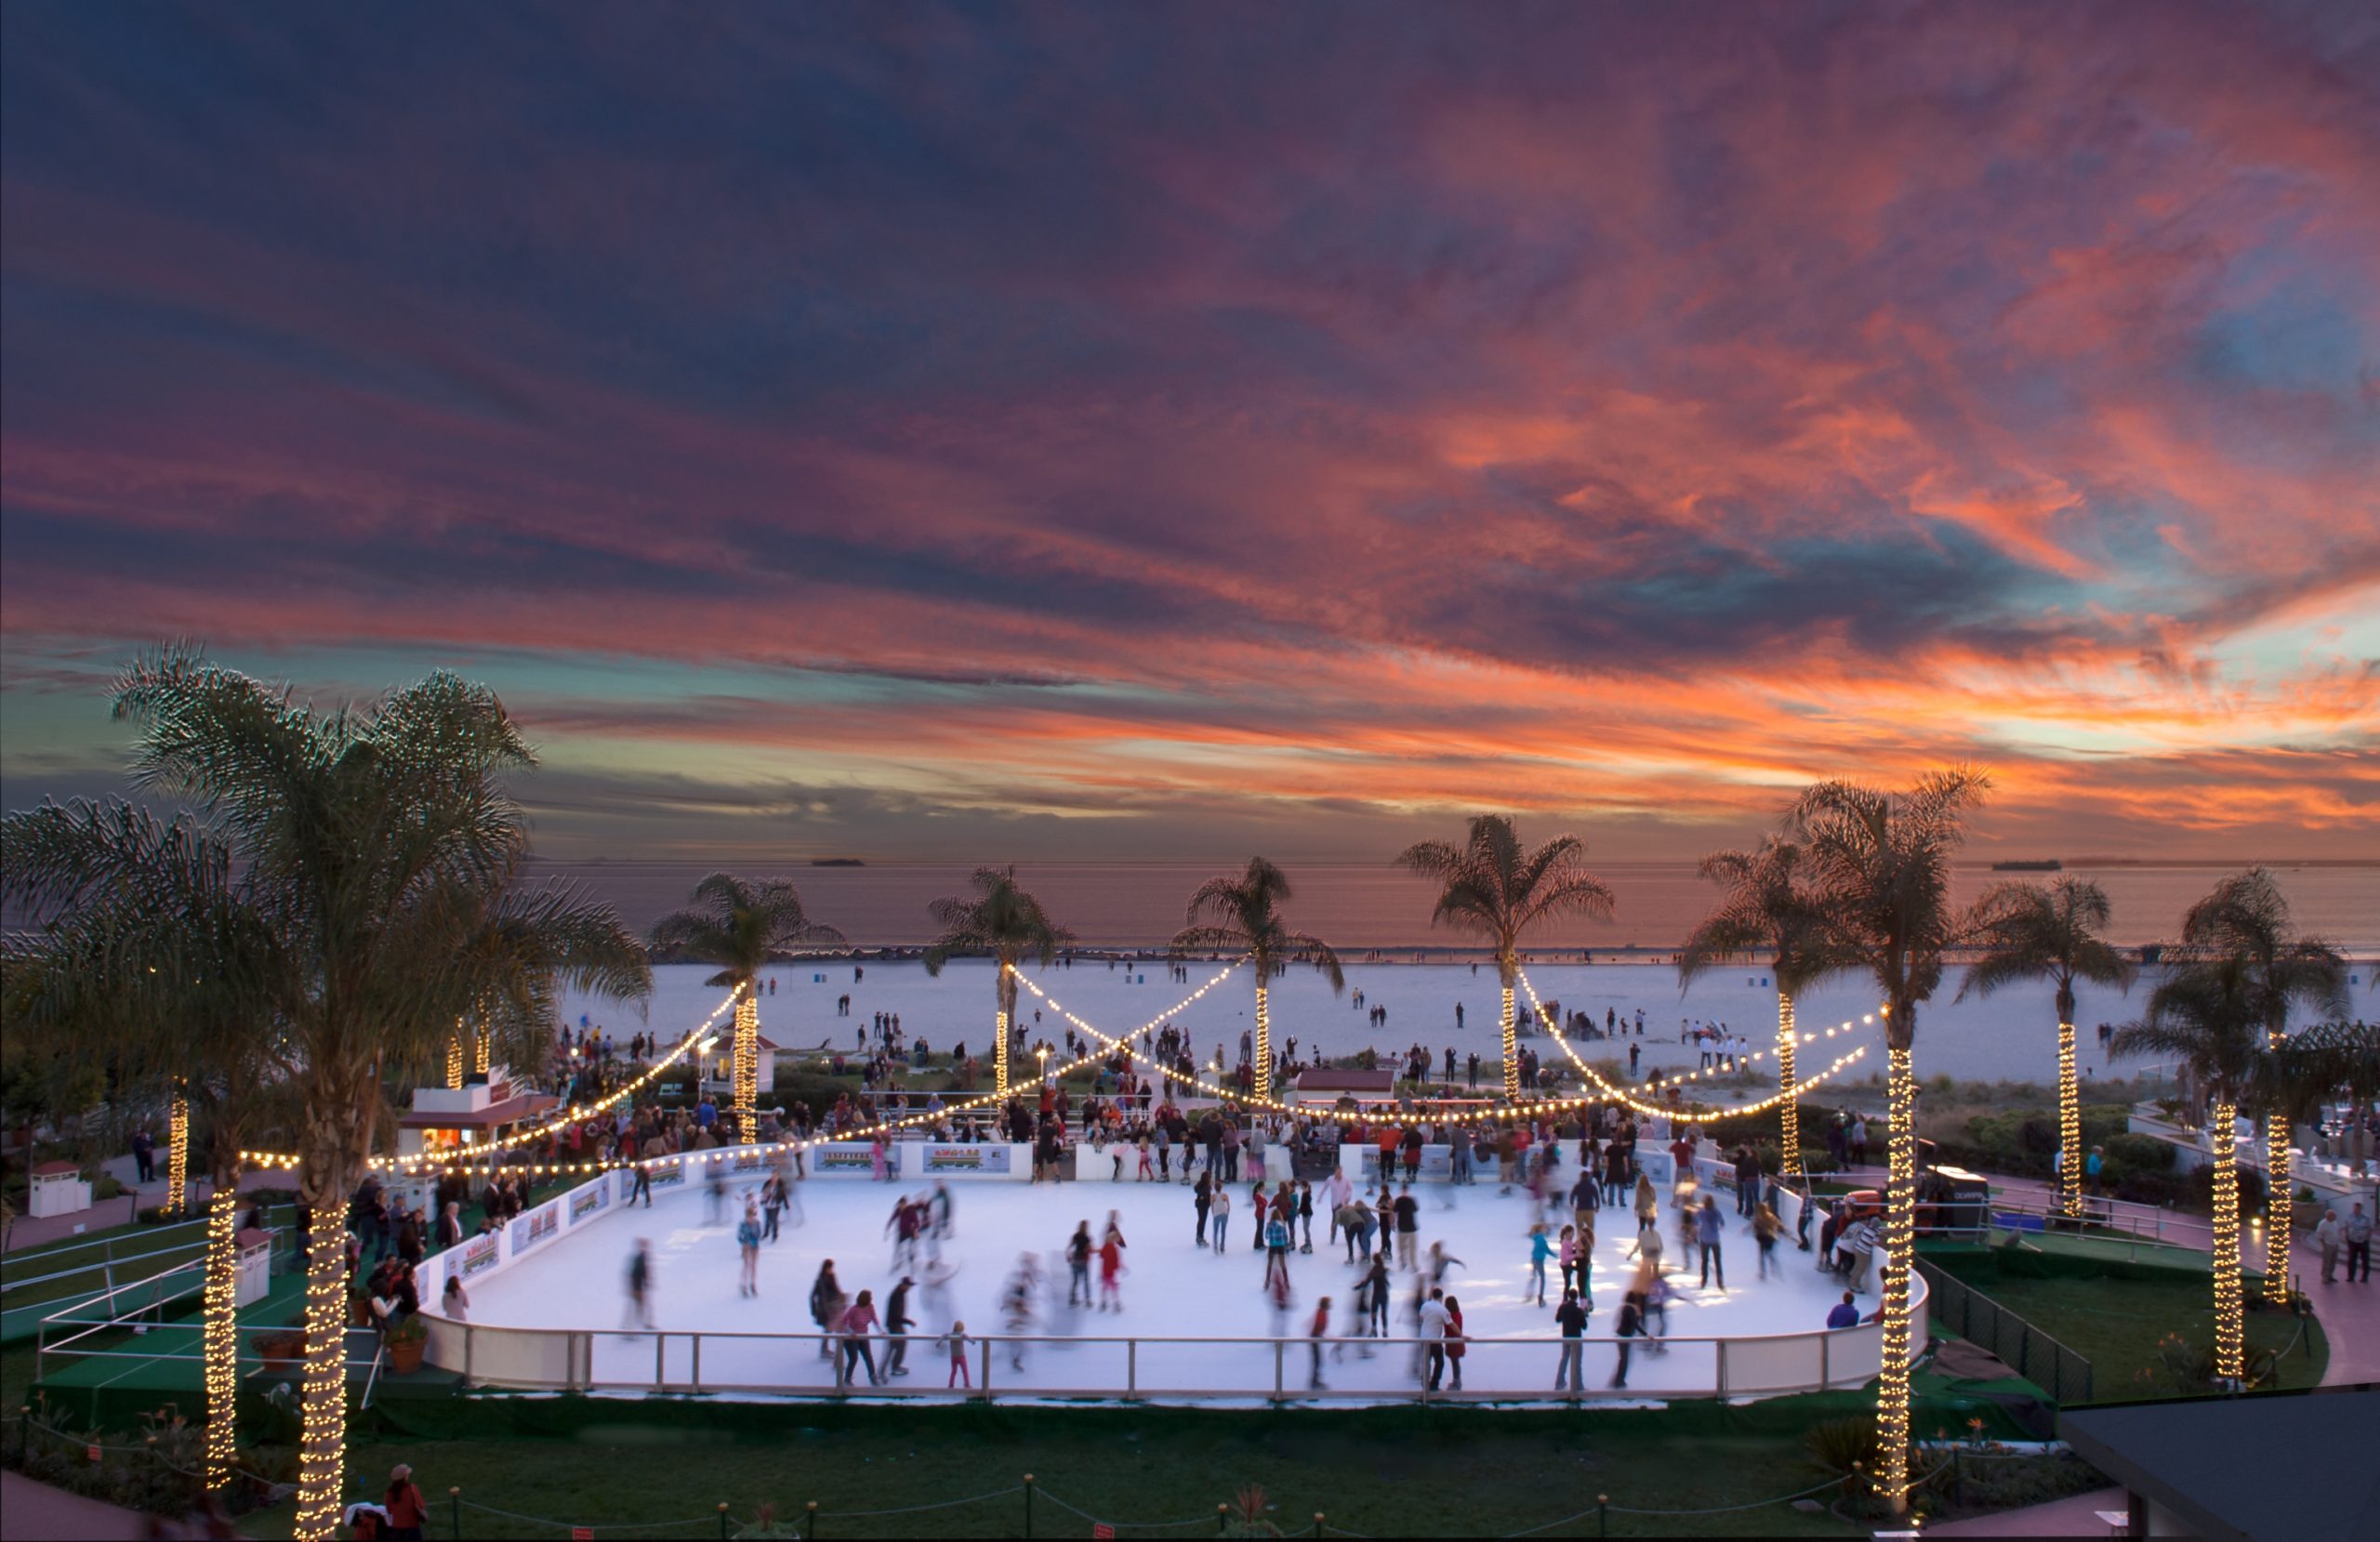 Head to the Mountains of SoCal for Family Holiday Fun at SkyPark